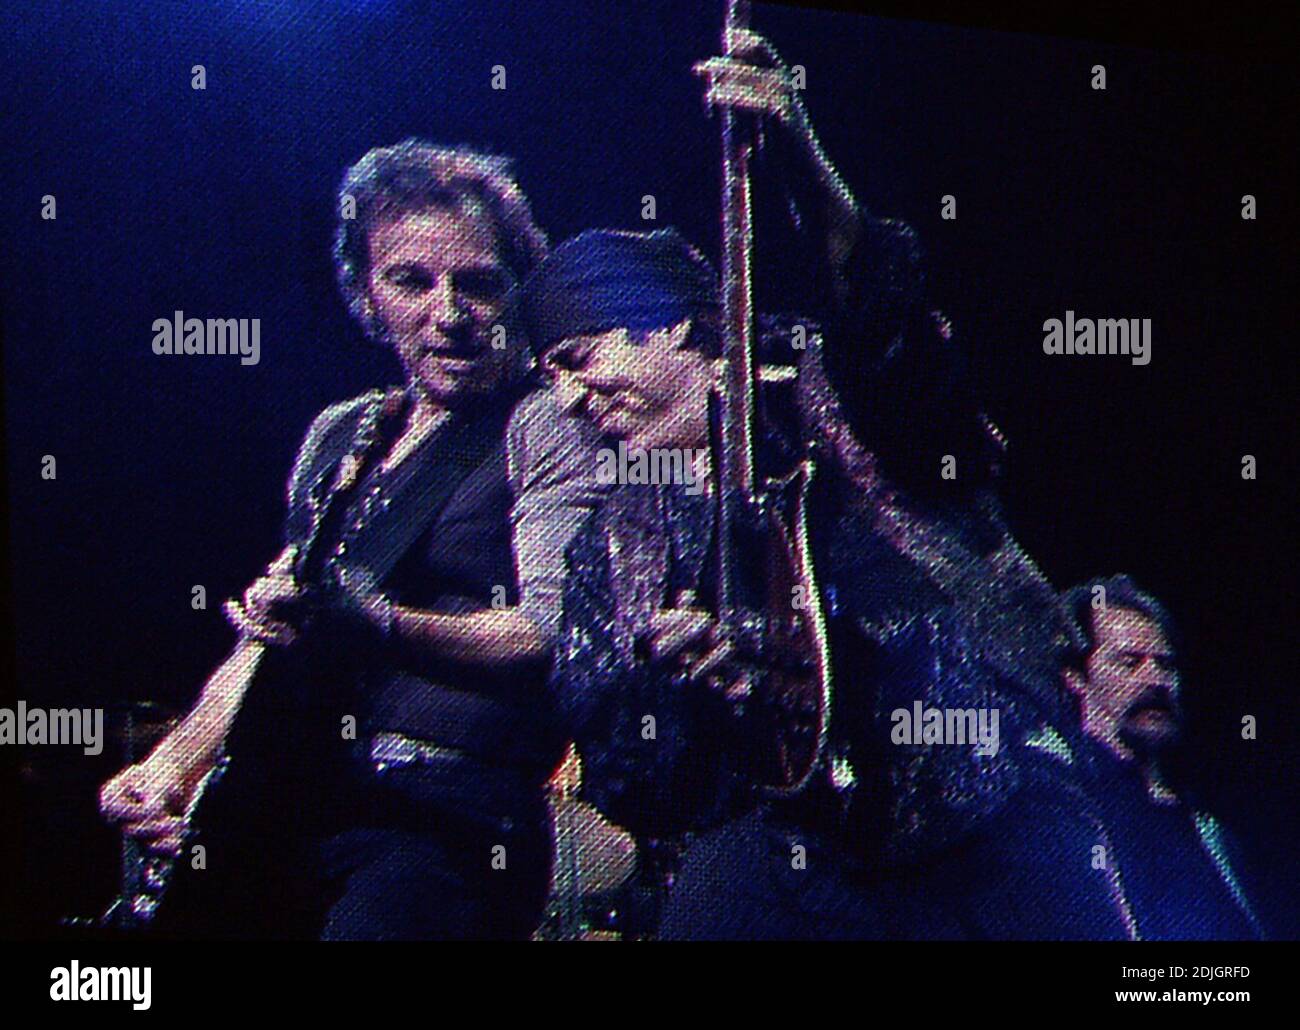 February 28: Bruce Springsteen, Little Steven Van Zandt, and Gary Tallent of The E Street Band perform at The Arena At Gwinnett in Duluth, Georgia on February 28, 2003. CREDIT: Chris McKay / MediaPunch Stock Photo